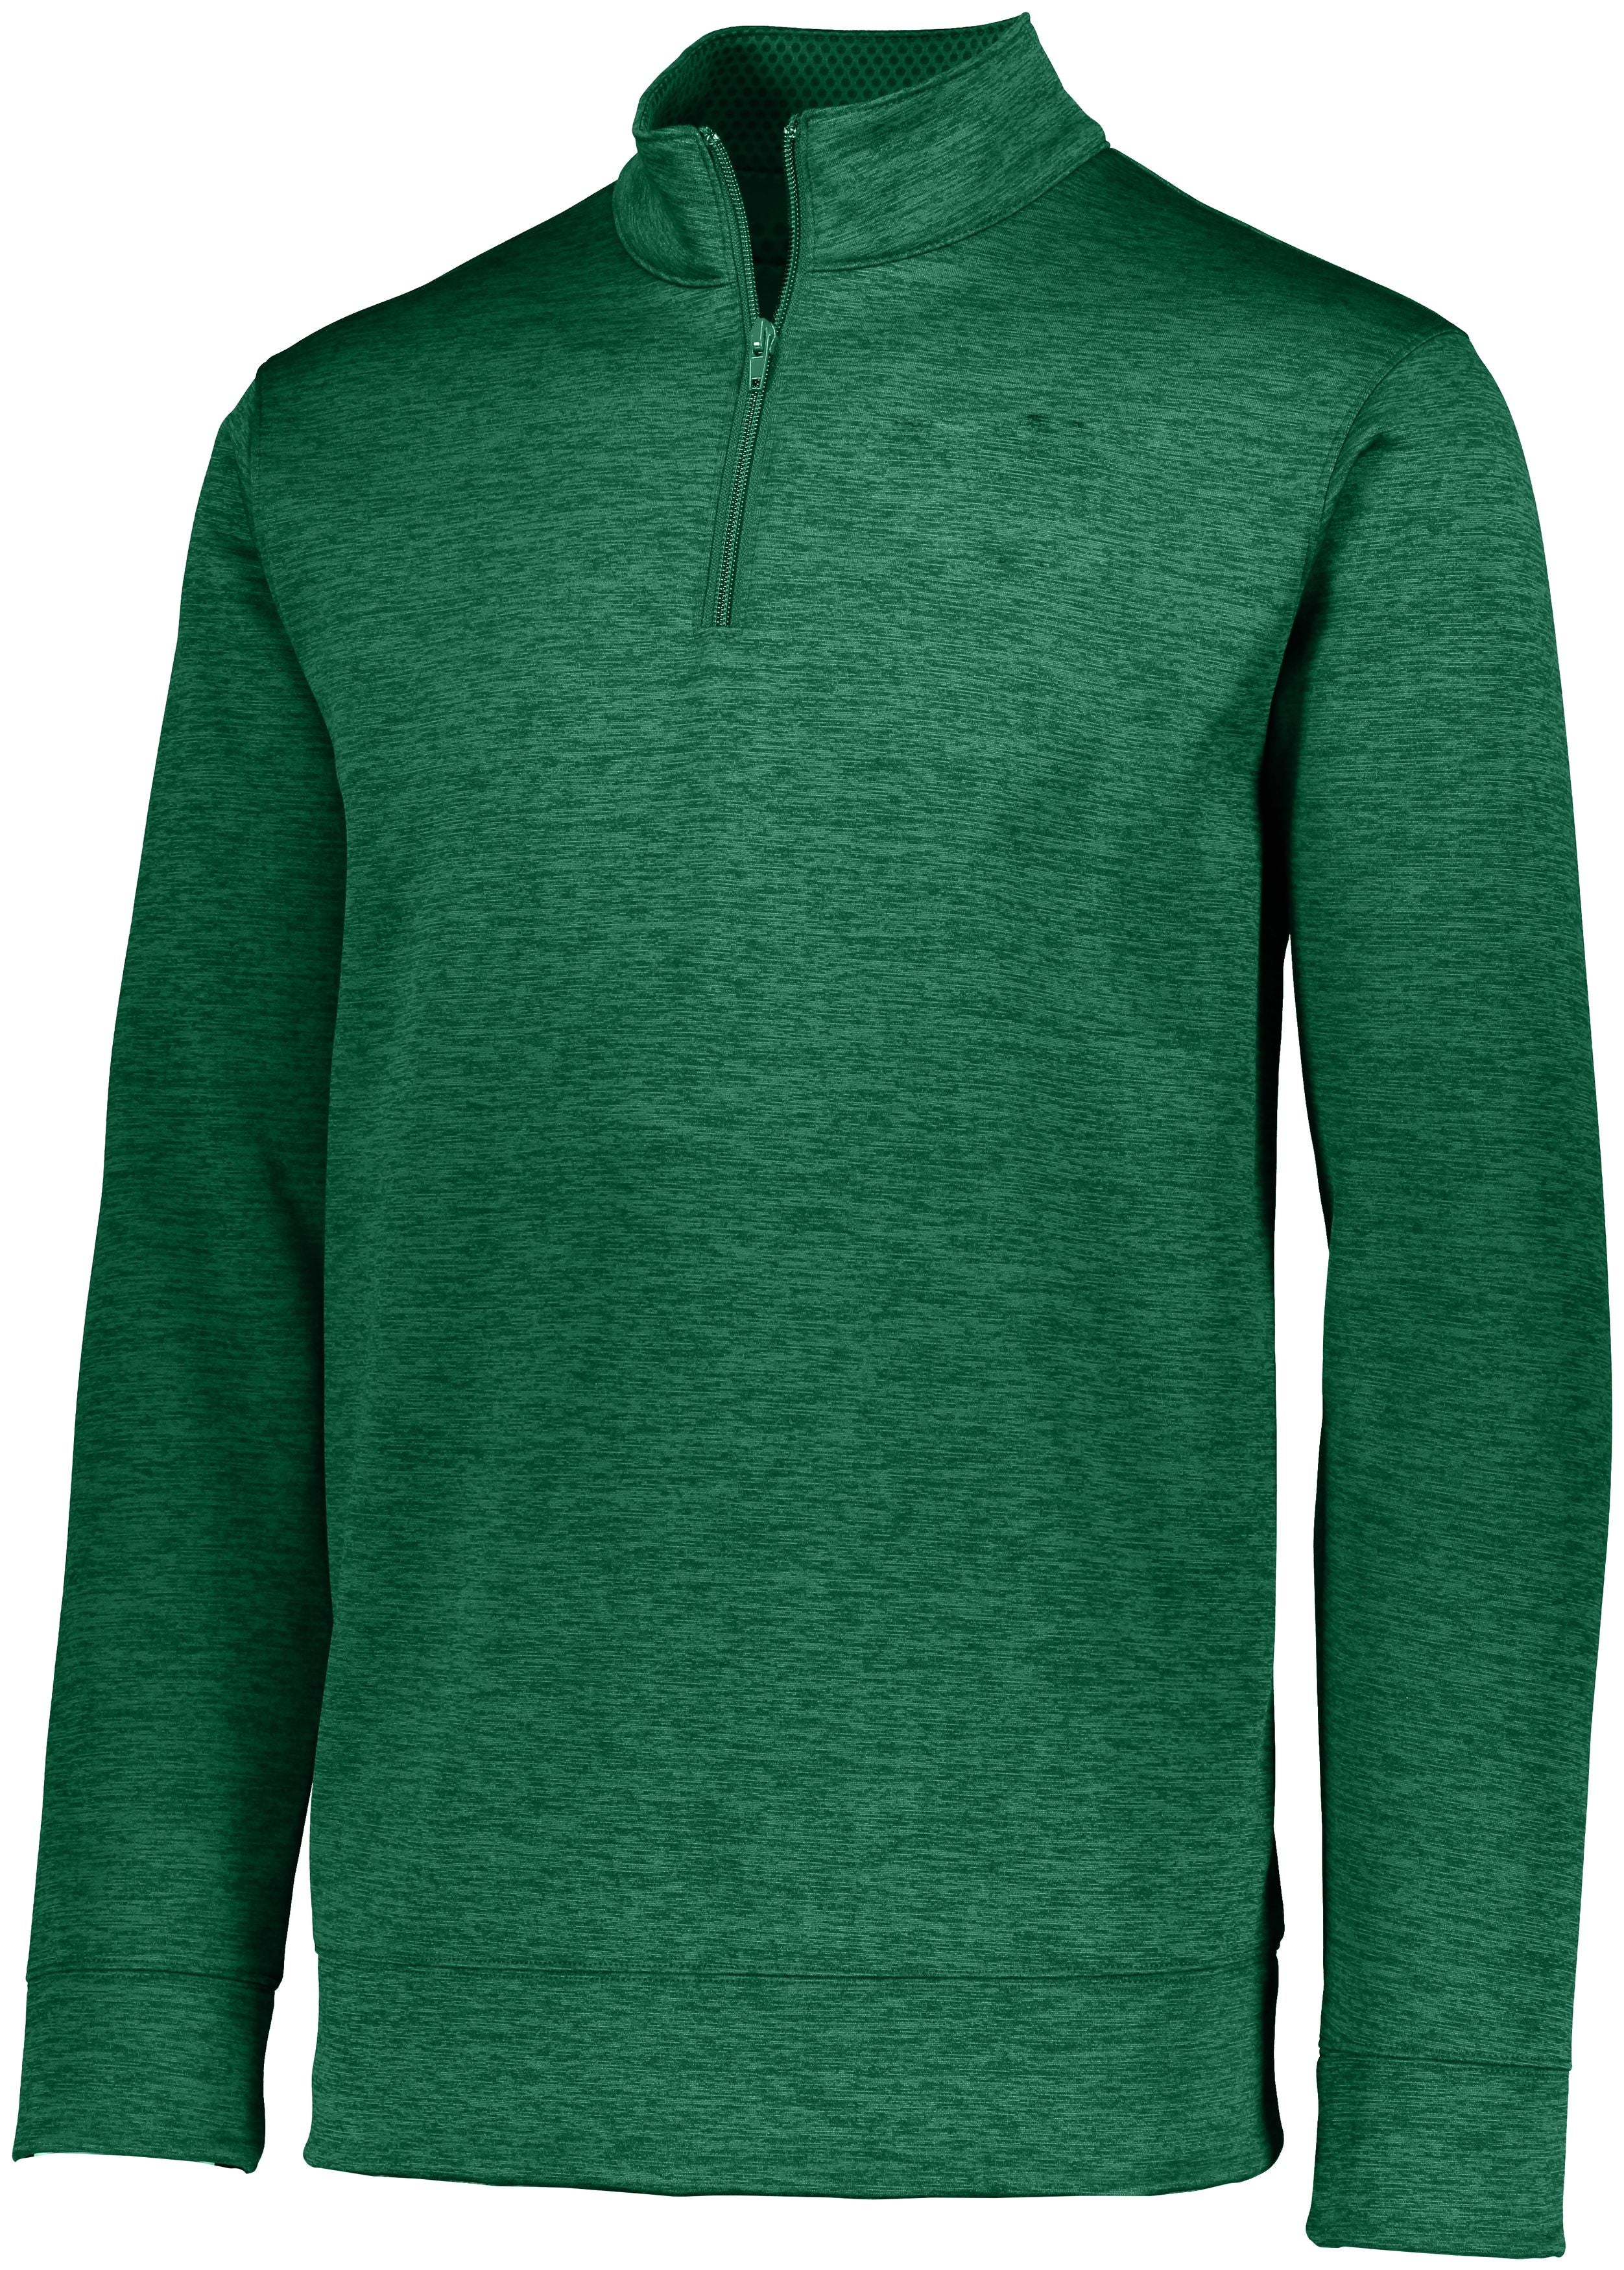 Augusta Sportswear Stoked Tonal Heather Pullover in Dark Green  -Part of the Adult, Adult-Pullover, Augusta-Products, Outerwear, Tonal-Fleece-Collection product lines at KanaleyCreations.com